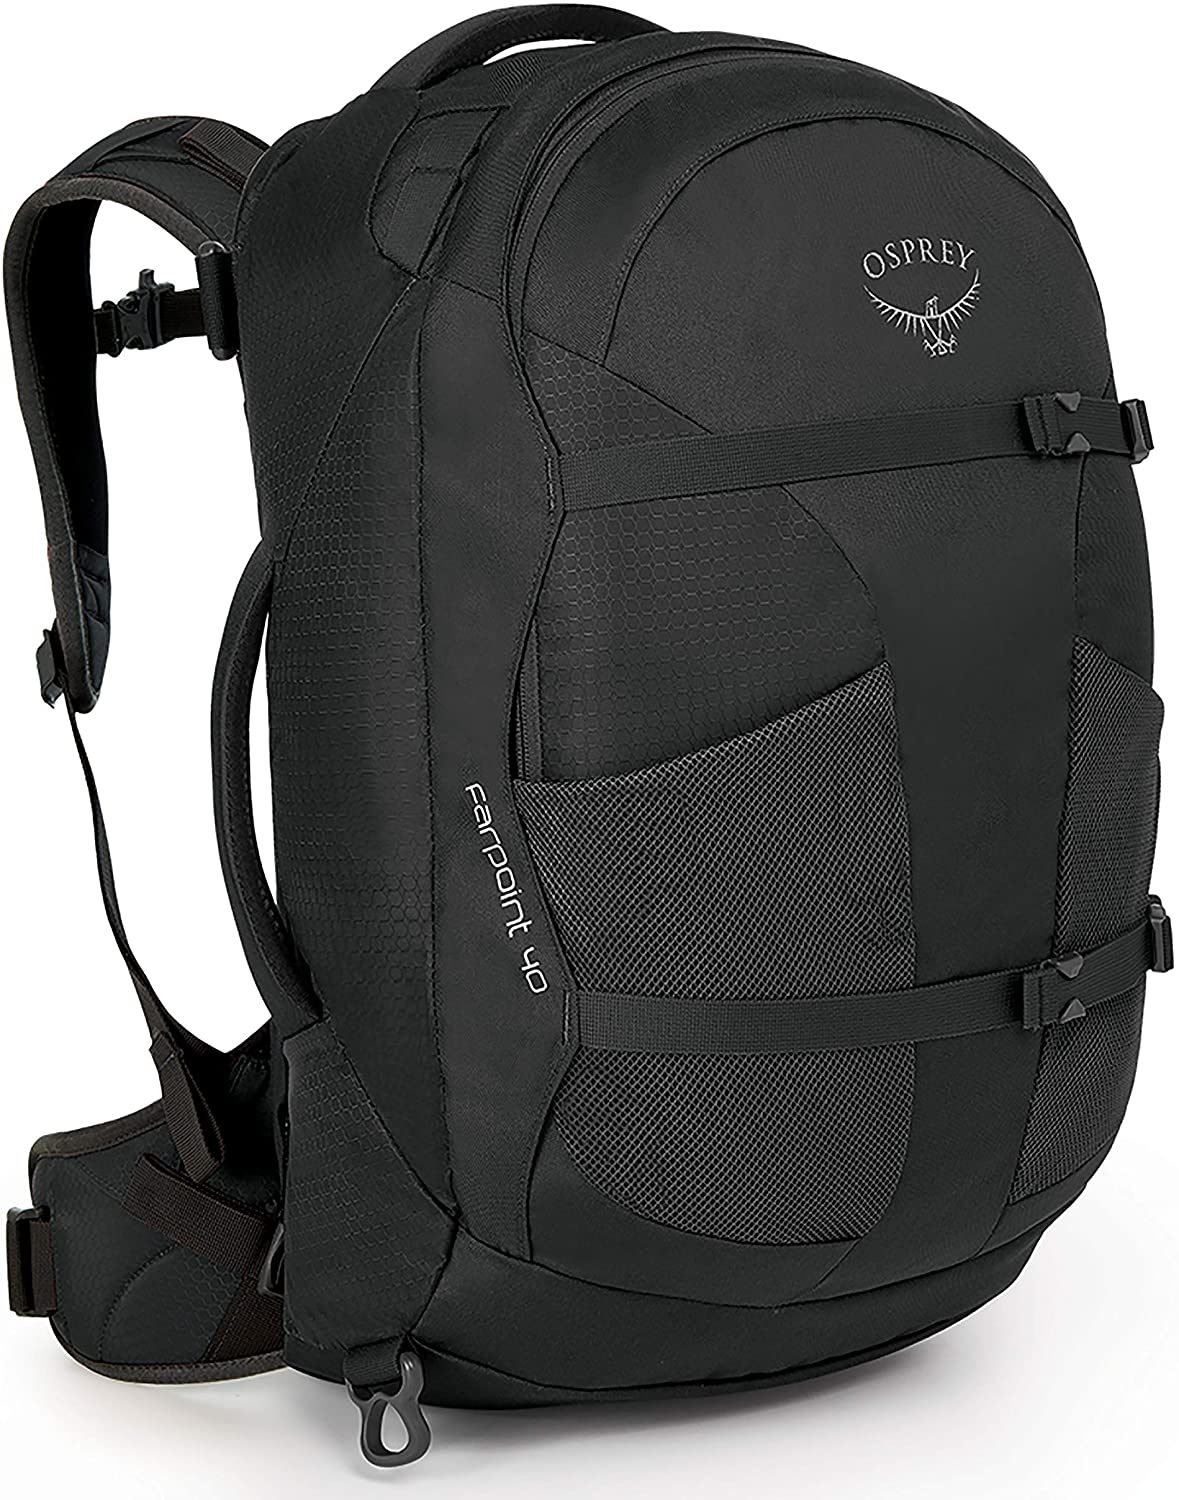 Osprey Farpoint 40 Travel Pack - image 4 of 4